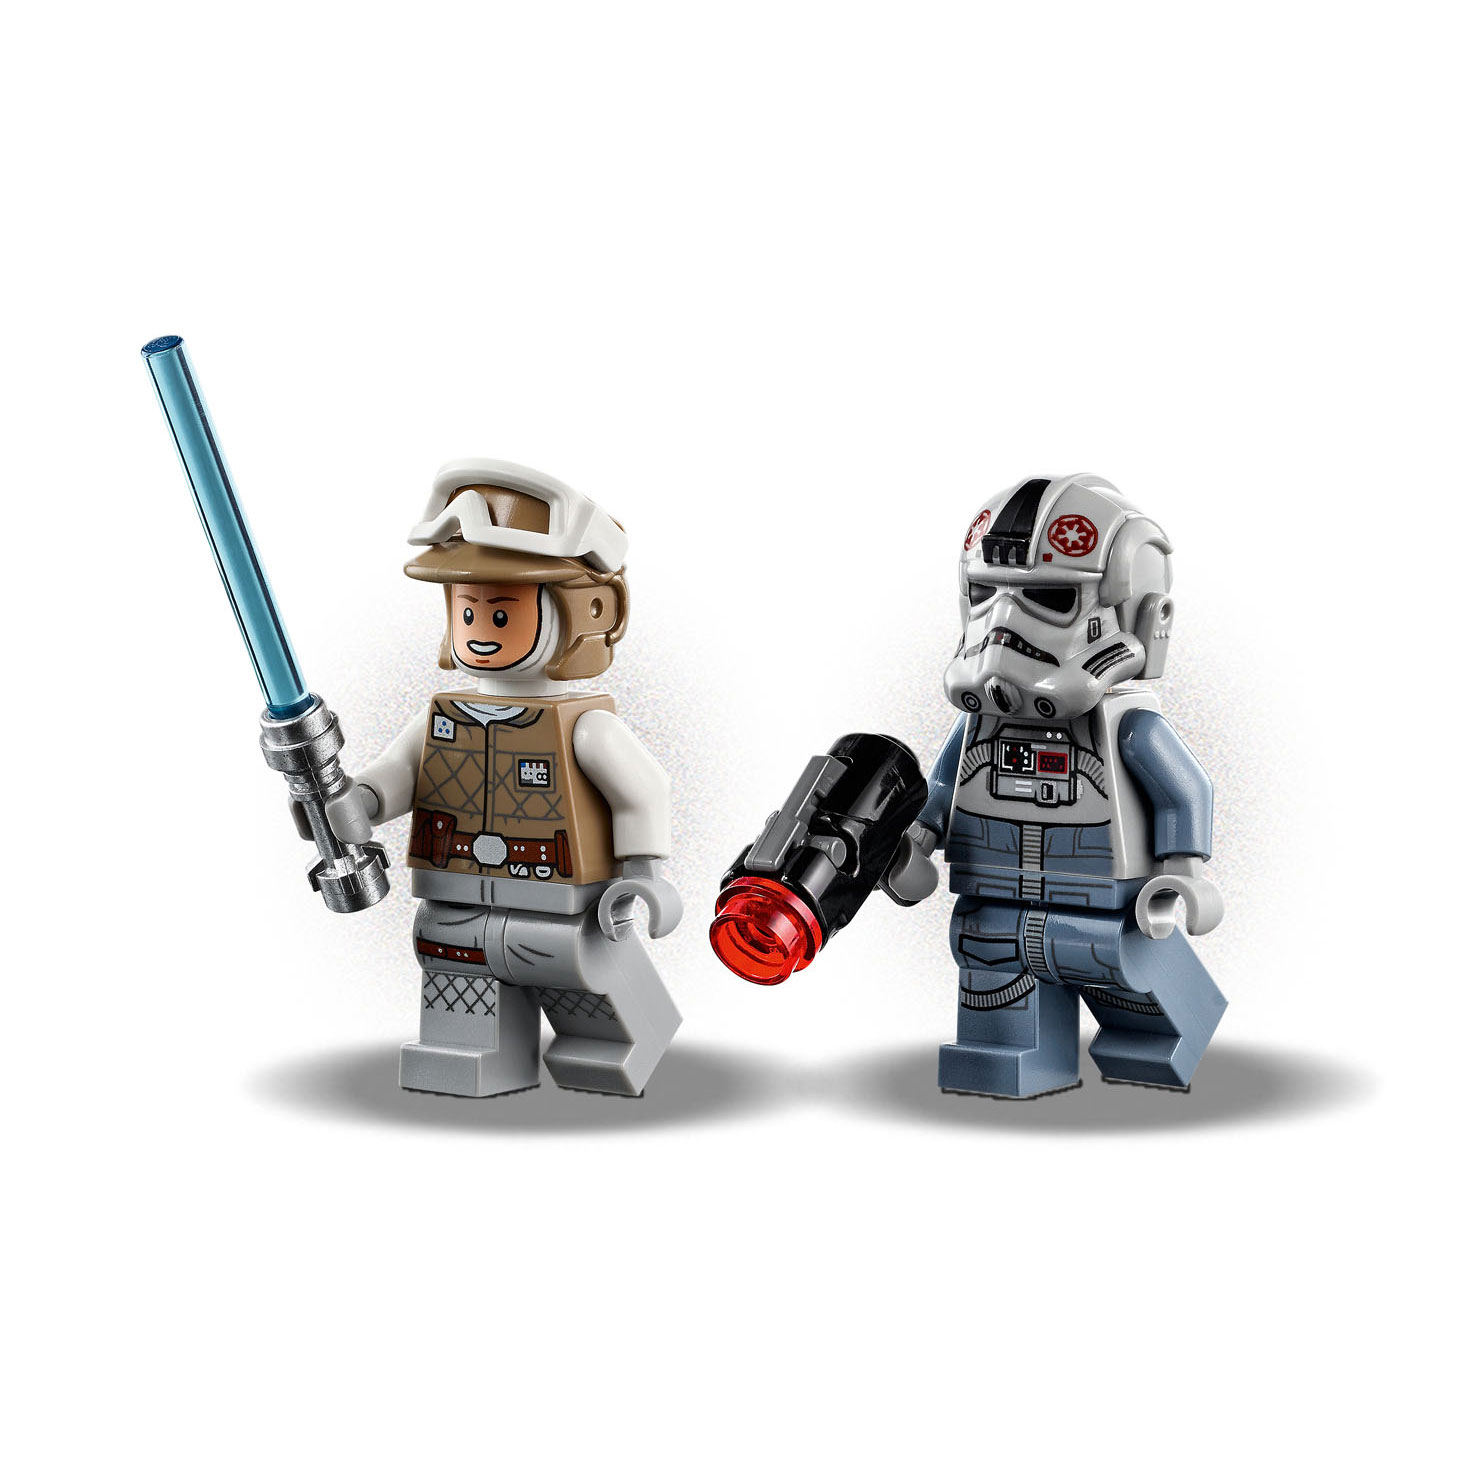 Lego Star Wars 75298 Microfighters